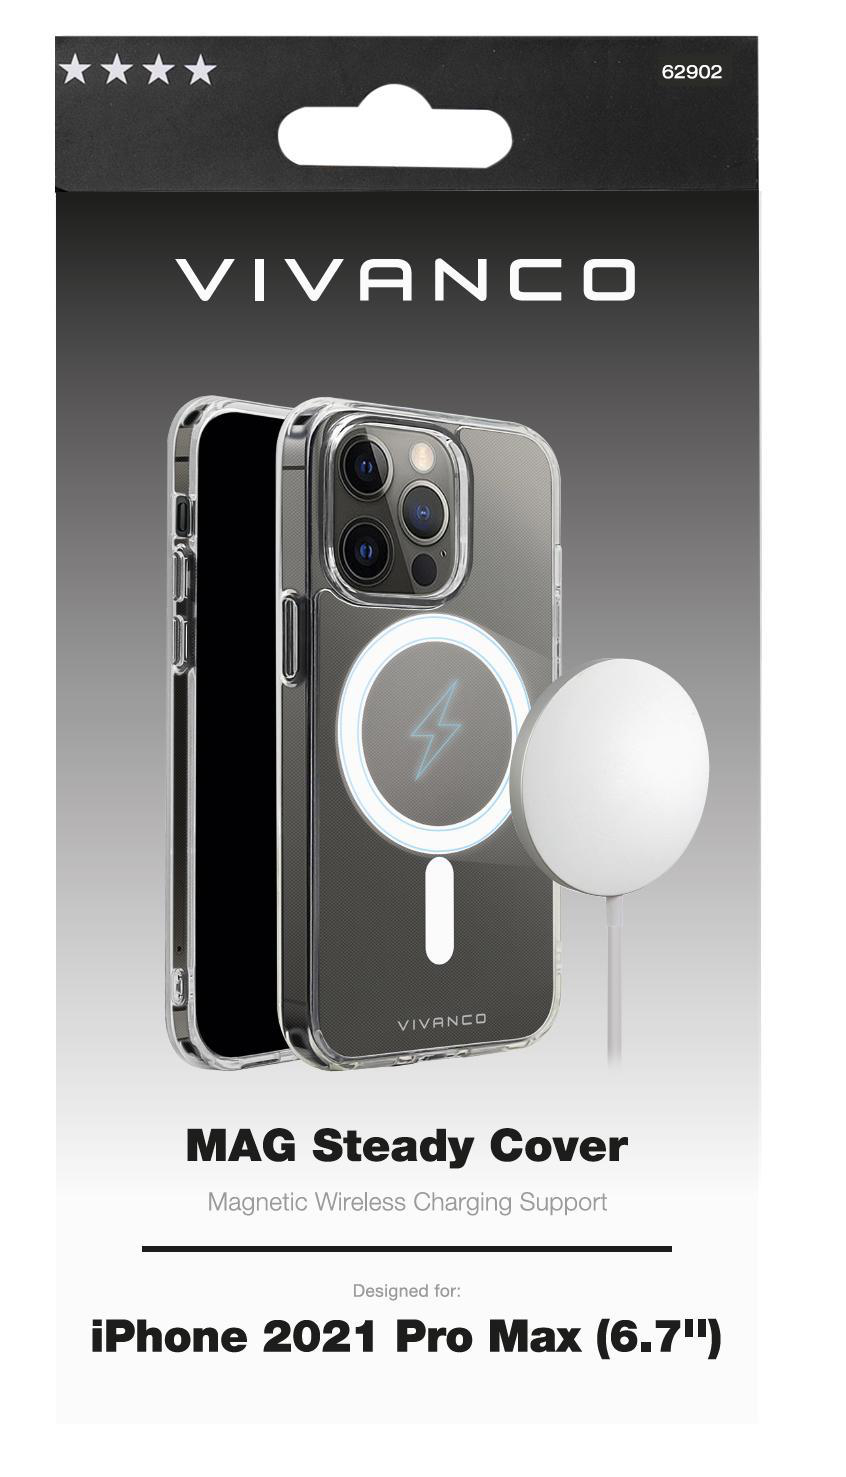 Pro Apple, Mag Steady, 13 Backcover, iPhone Transparent VIVANCO Max,